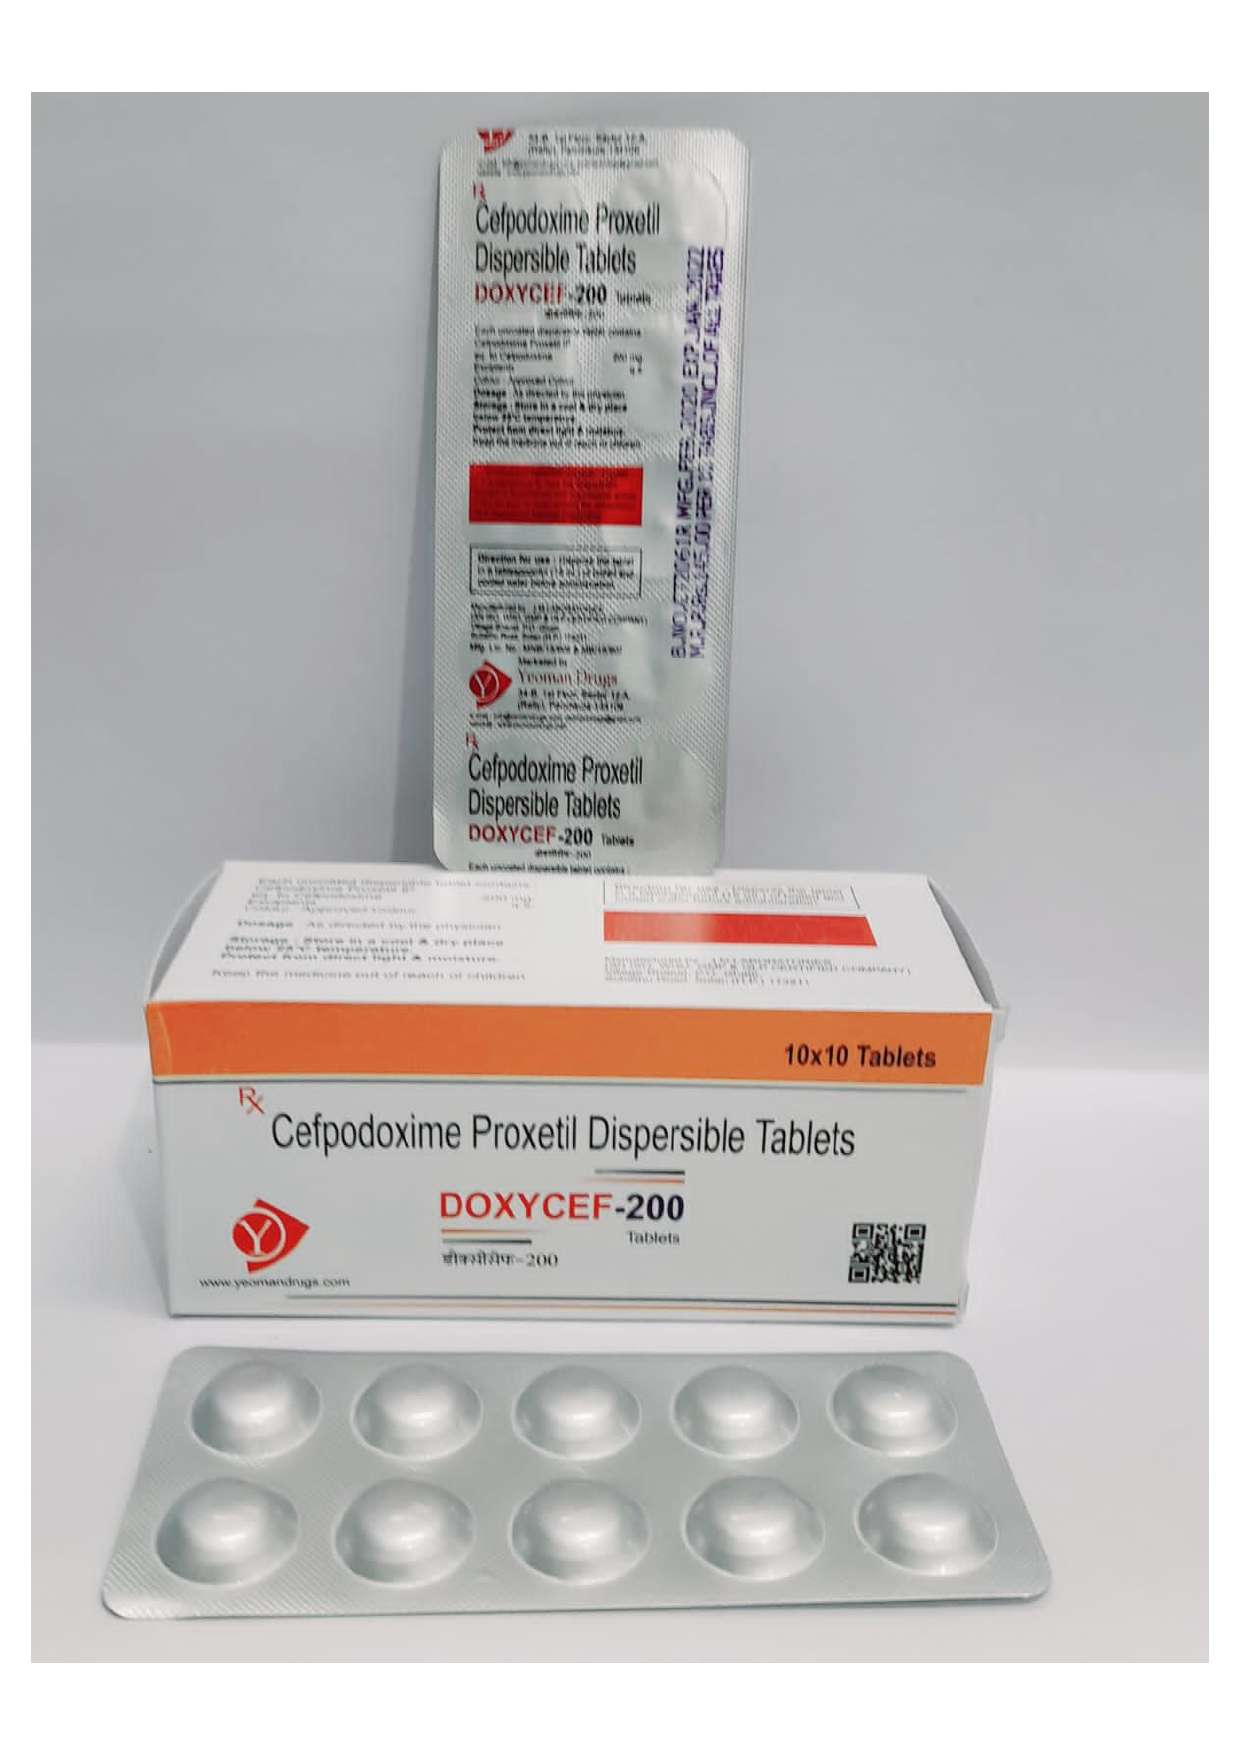 cefodoxime proxetil 200mg. dispersible